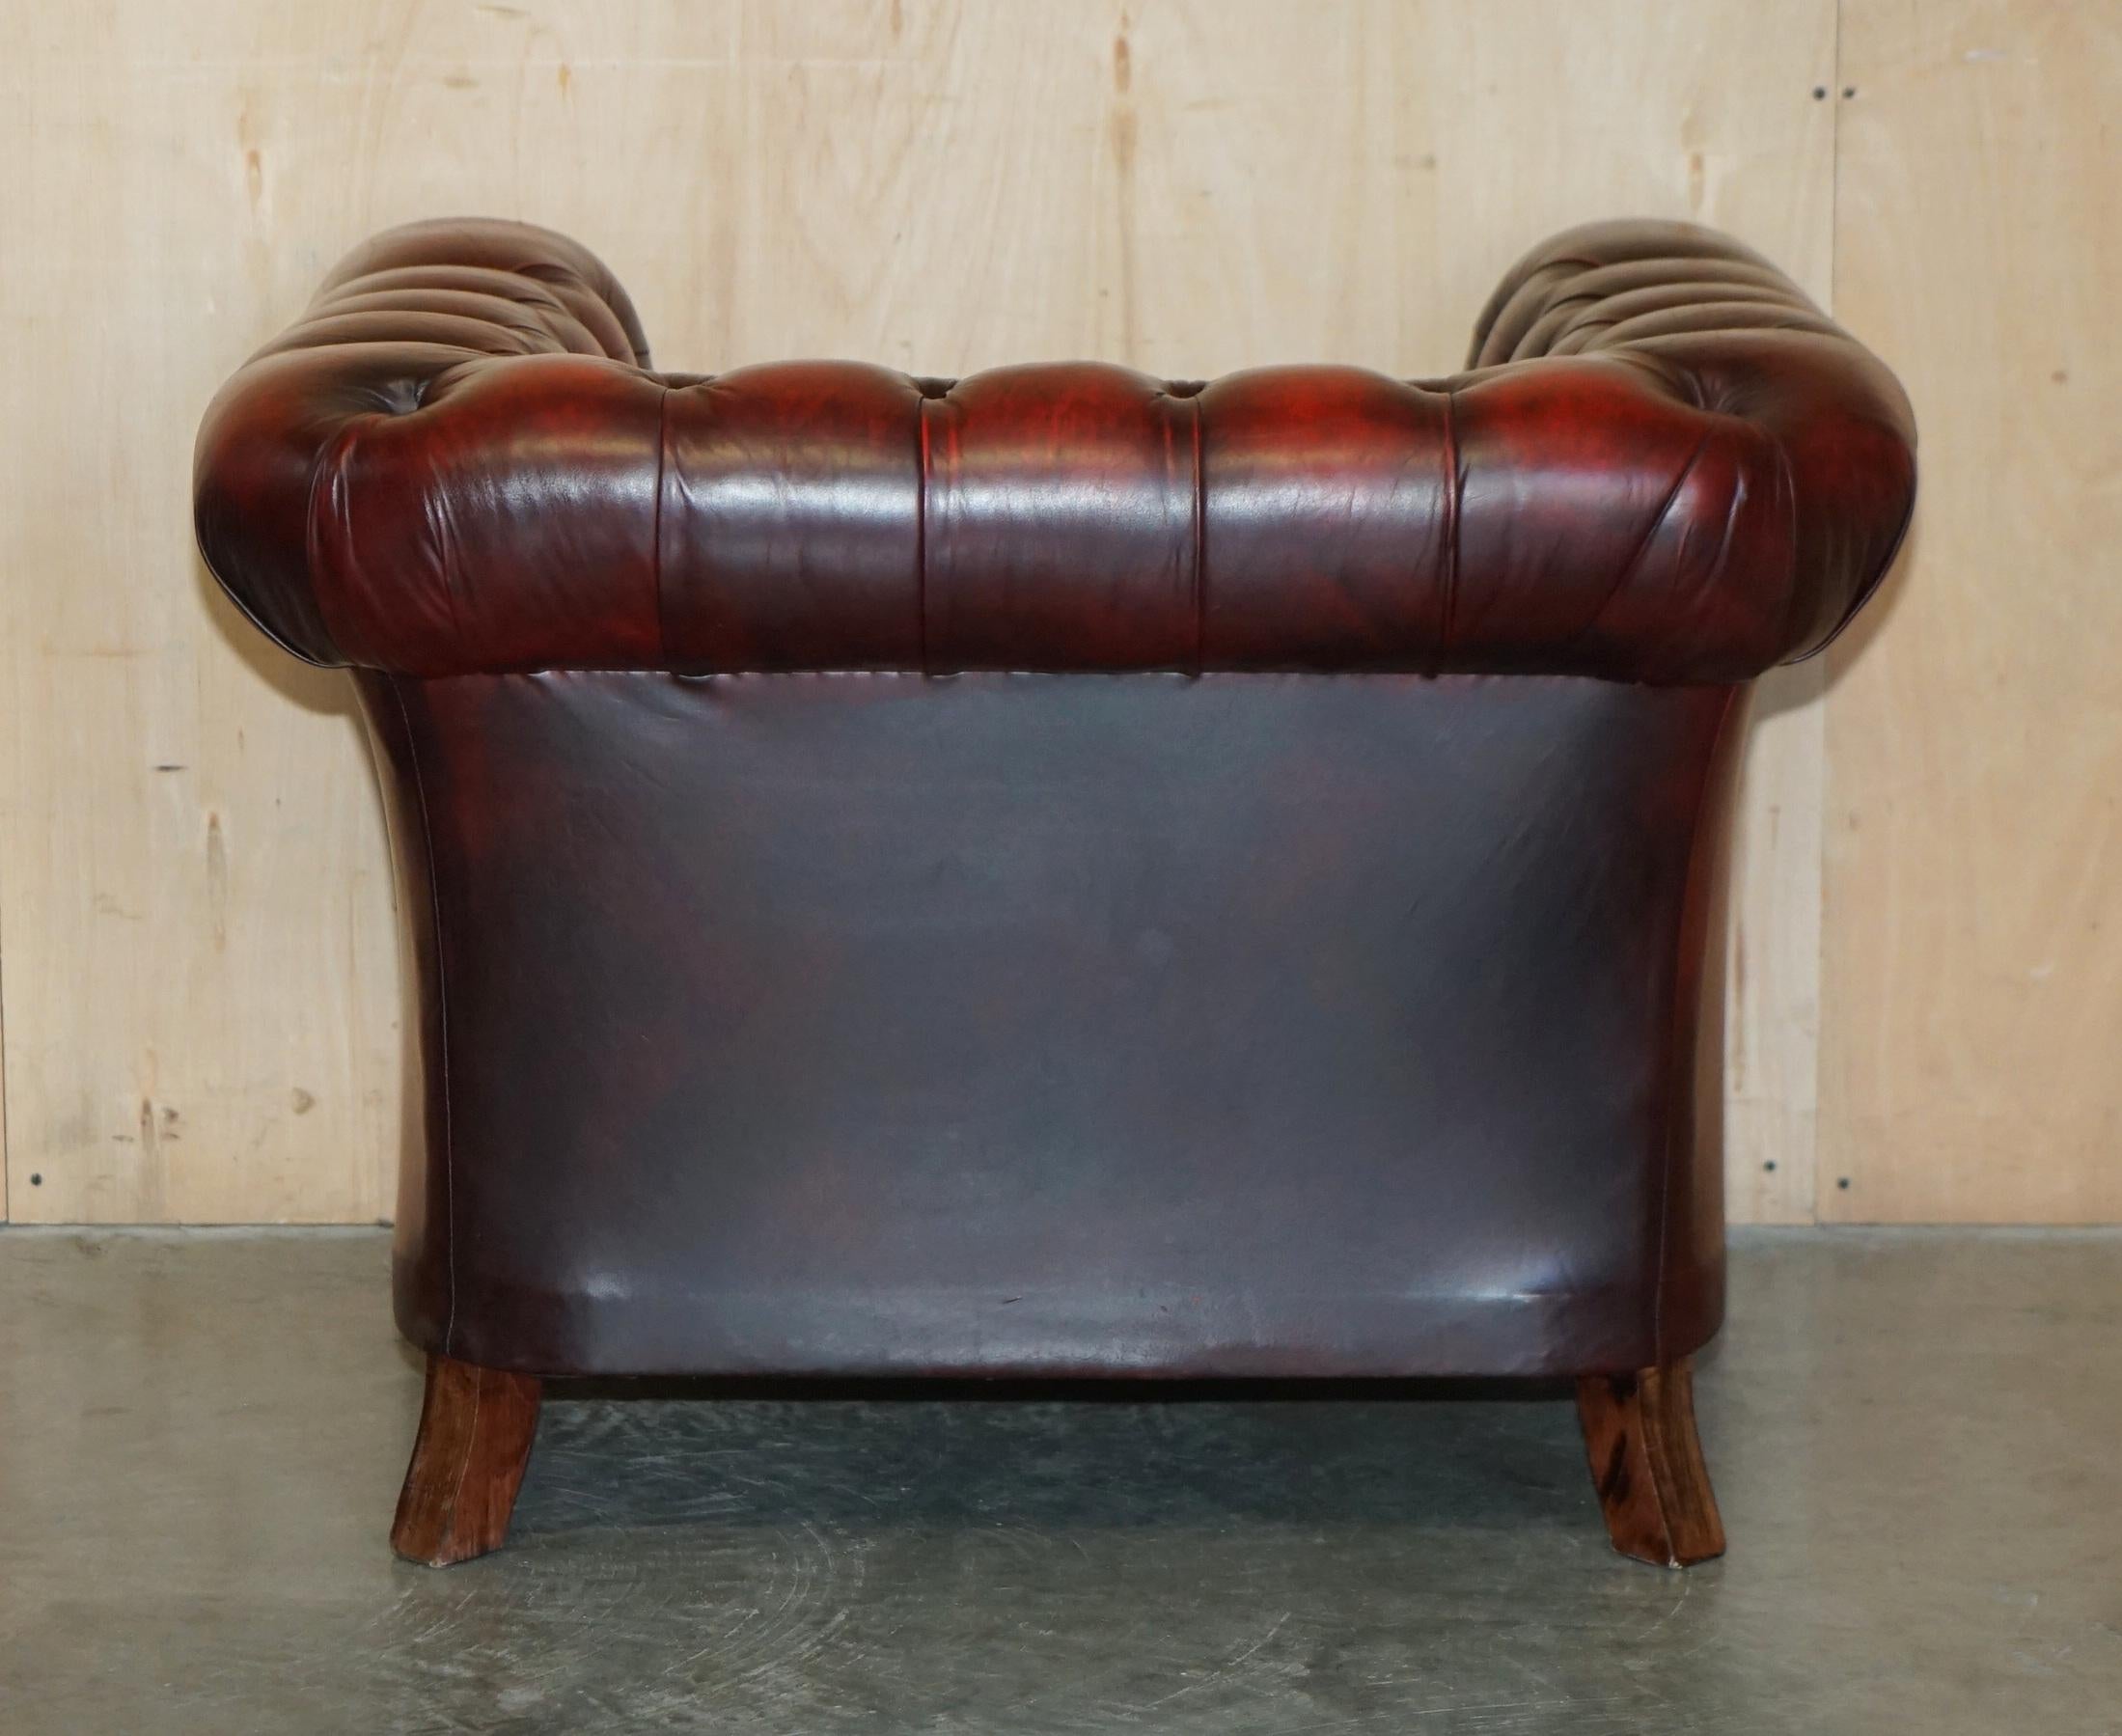 PAIR OF ViNTAGE OXBLOOD LEATHER CHESTERFIELD CLUB ARMCHAIRS WITH ELEGANT LEGS 5